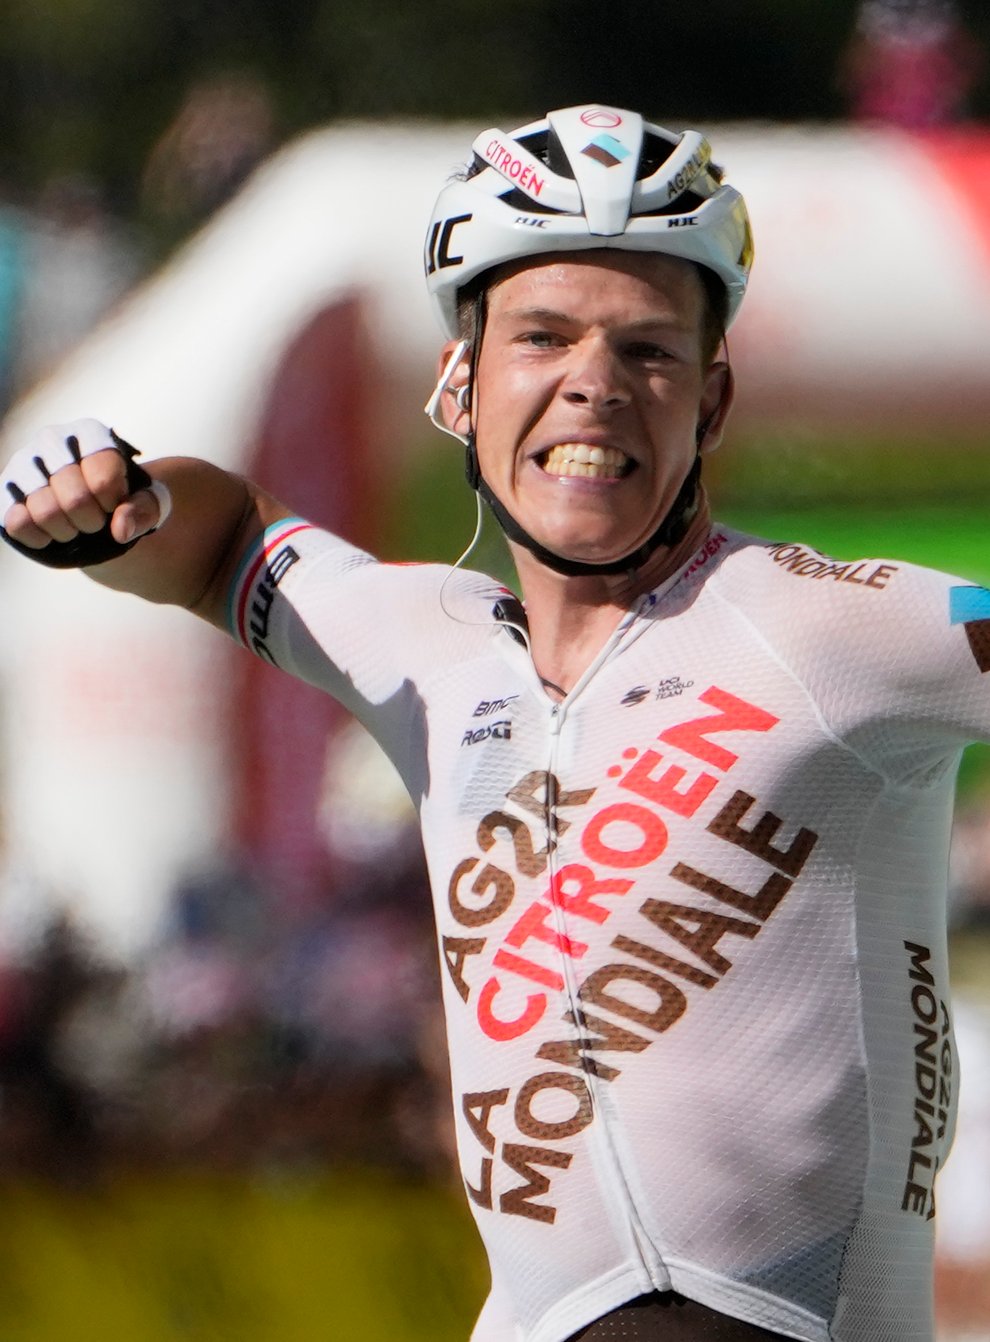 Bob Jungels celebrated a Tour de France stage victory in Chalet on Sunday (Thibault Camus/AP)